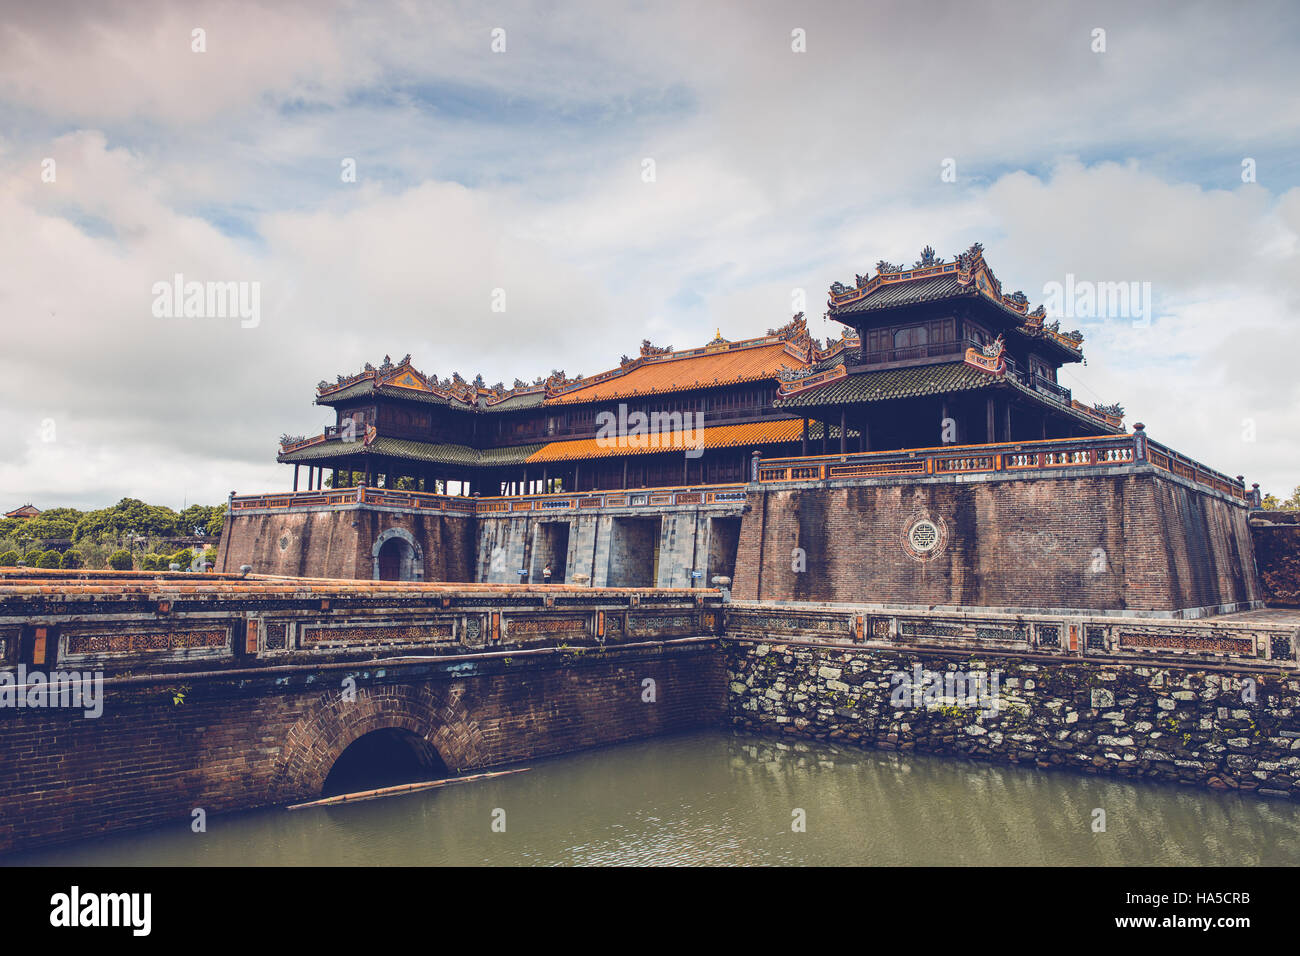 Imperial Royal Palace of Nguyen dynasty in Hue, Vietnam Stock Photo